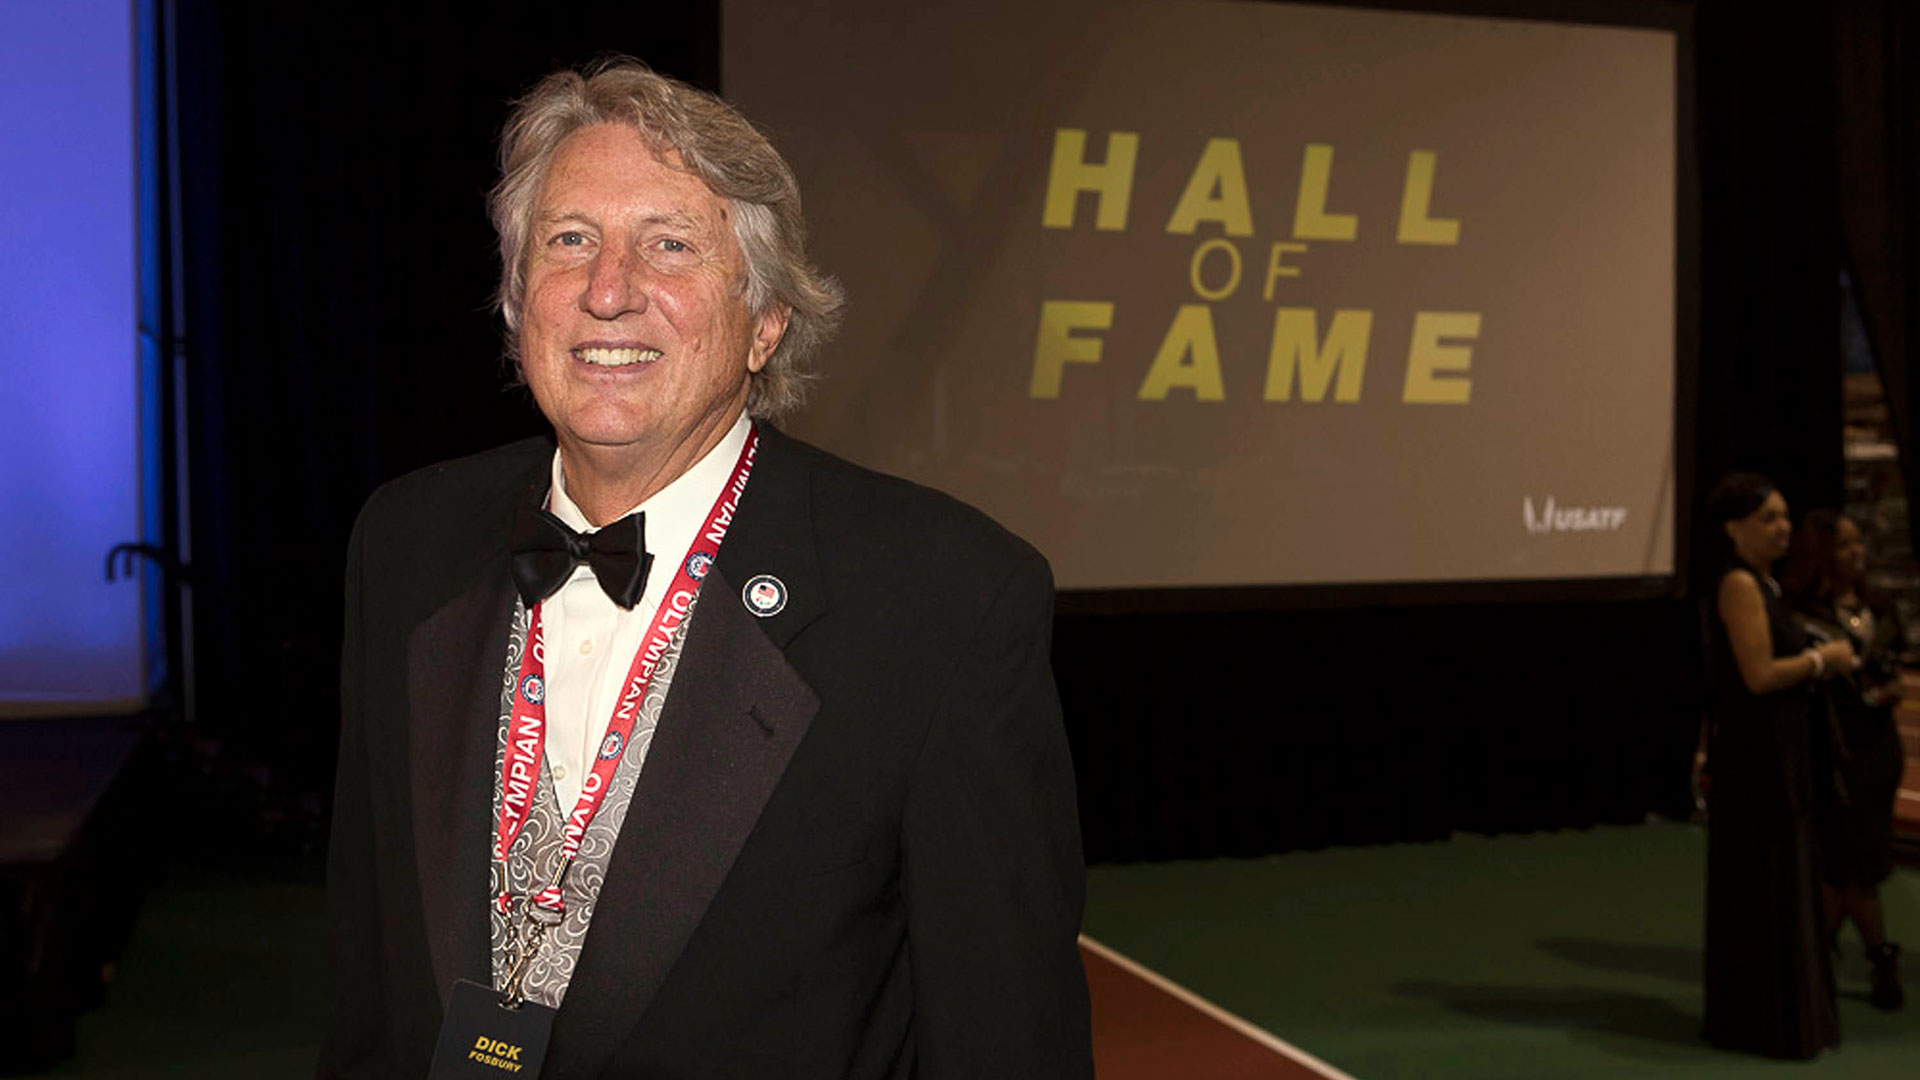 Dick Fosbury, Olympic champion who revolutionized high jumping 1920, died